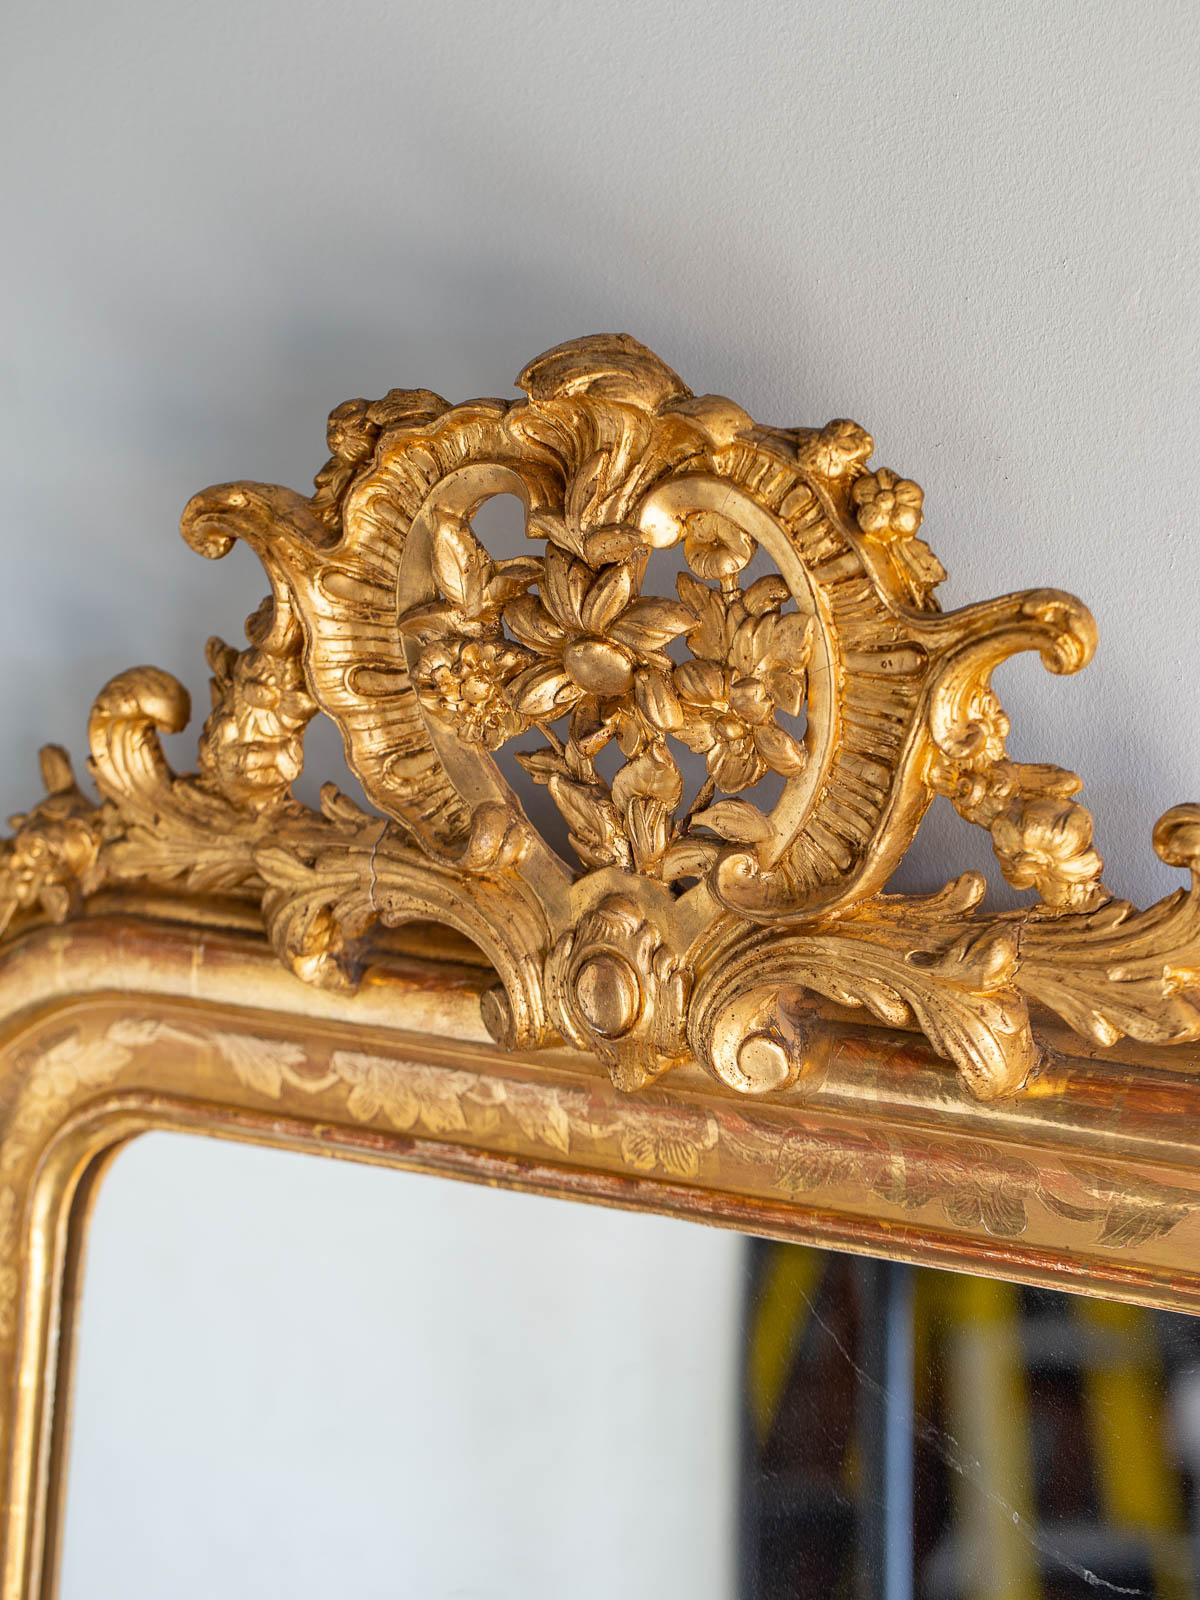 A beautiful antique French Louis Philippe gold mirror, circa 1885 featuring a bold cartouche and the original mirror glass. The elegant minimal frame with its upper rounded corners is embellished with an incised floral design that provides a